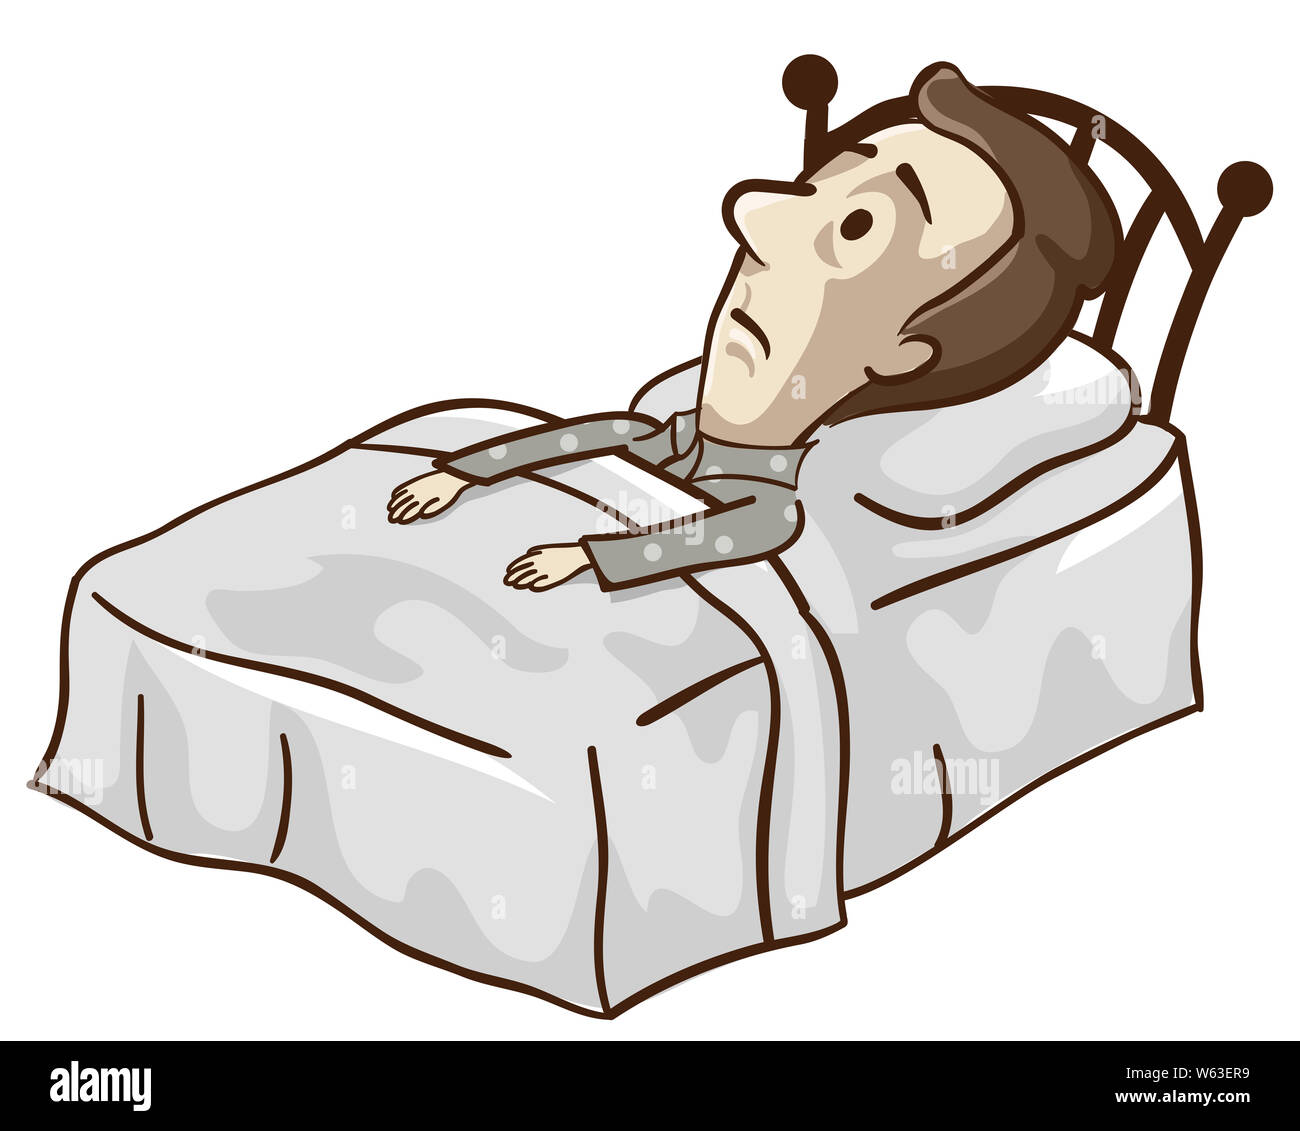 Illustration of a Man with Low Blood Pressure, Lying Down in Bed Awake at Night and Feeling Restless Stock Photo